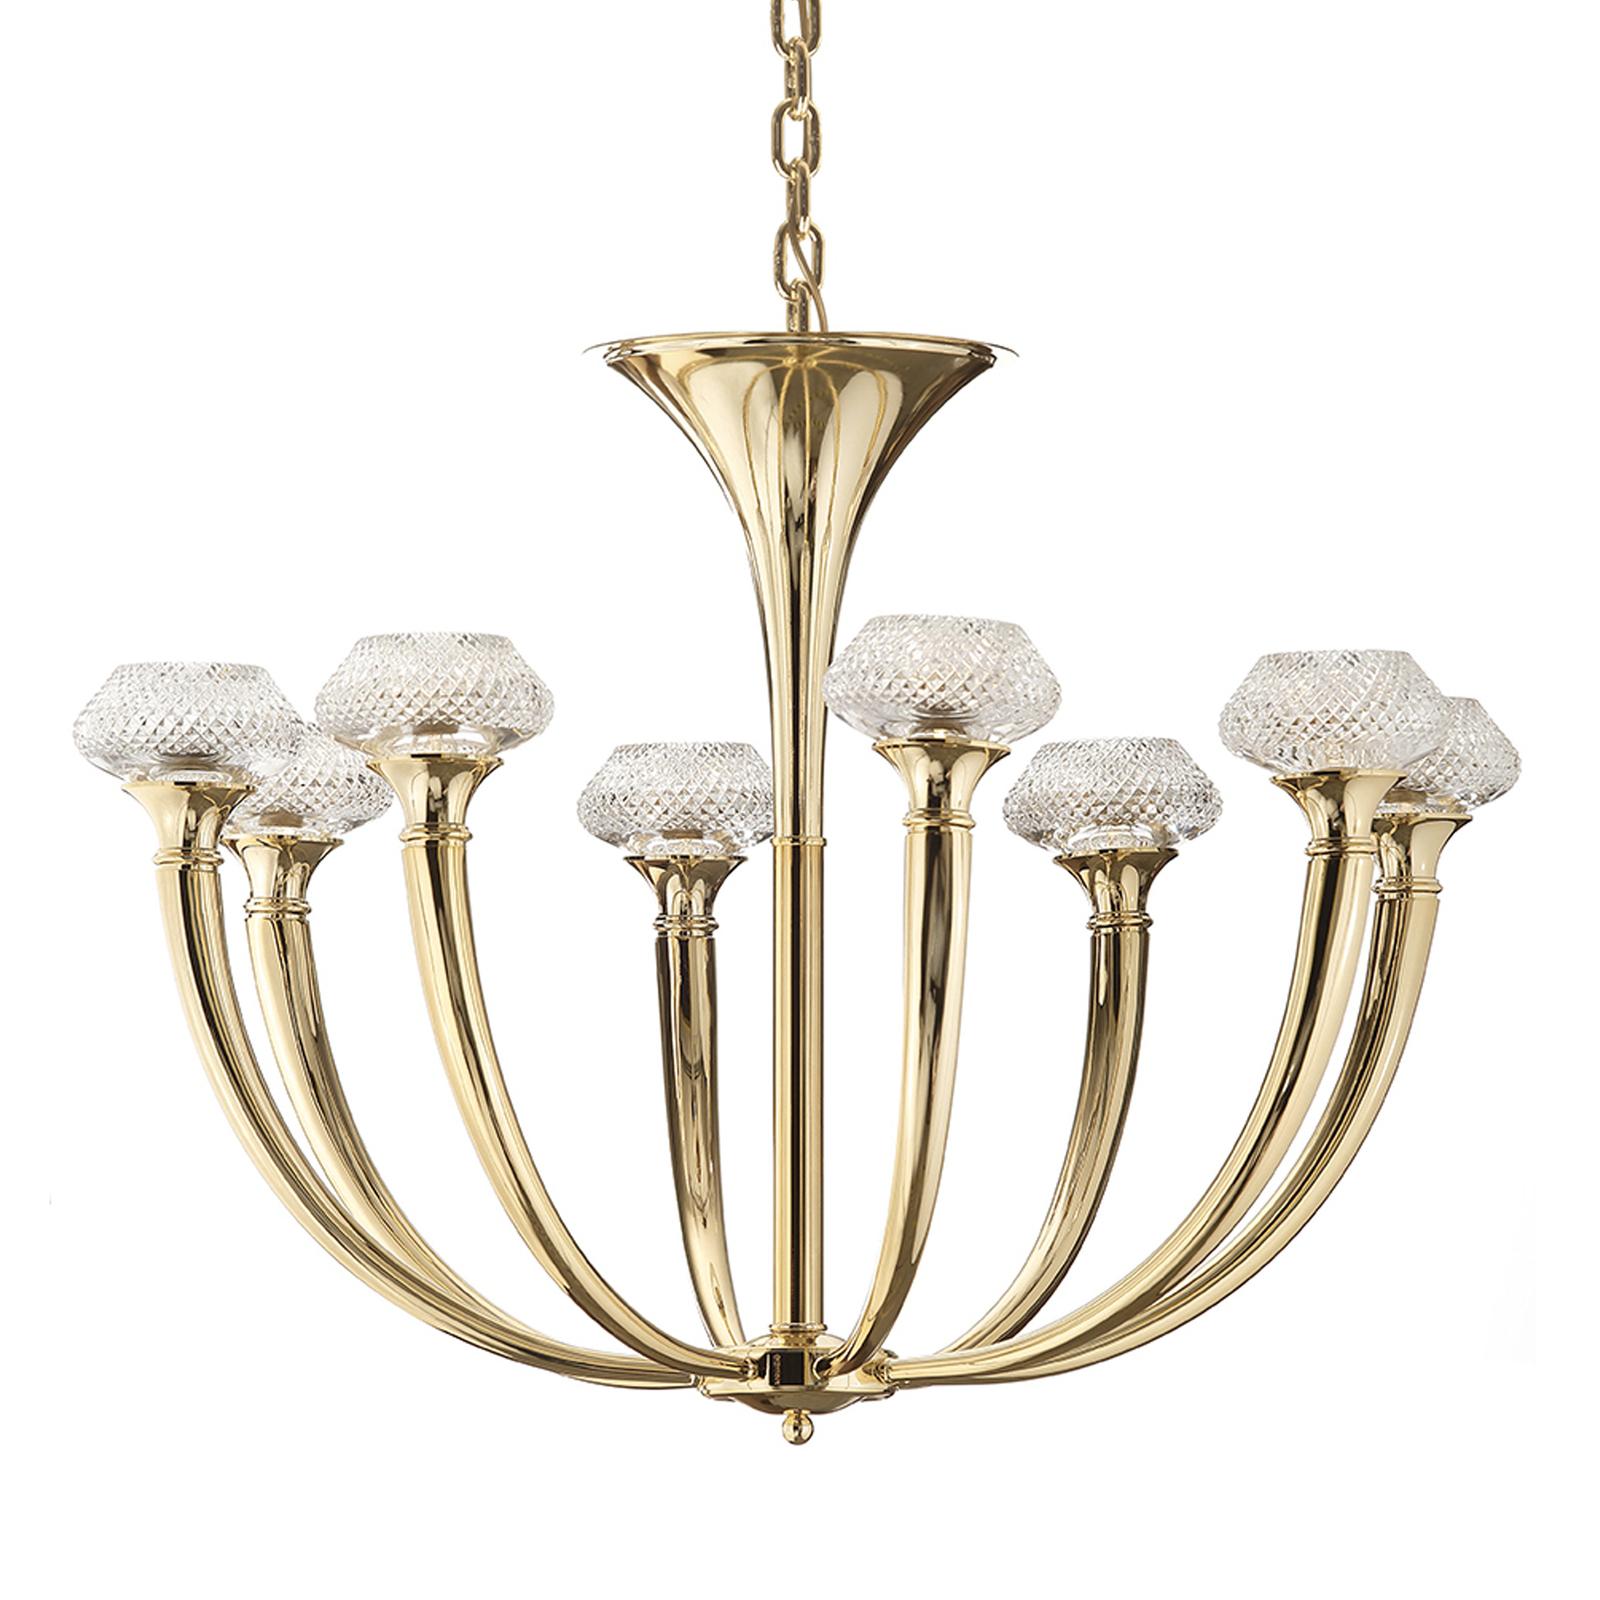 This exquisite chandelier is part of the Art Deco collection, featuring superb pieces with a distinctive bold and sophisticated silhouette. Crafted by hand using noble materials and traditional methods, this piece combines two luxurious materials